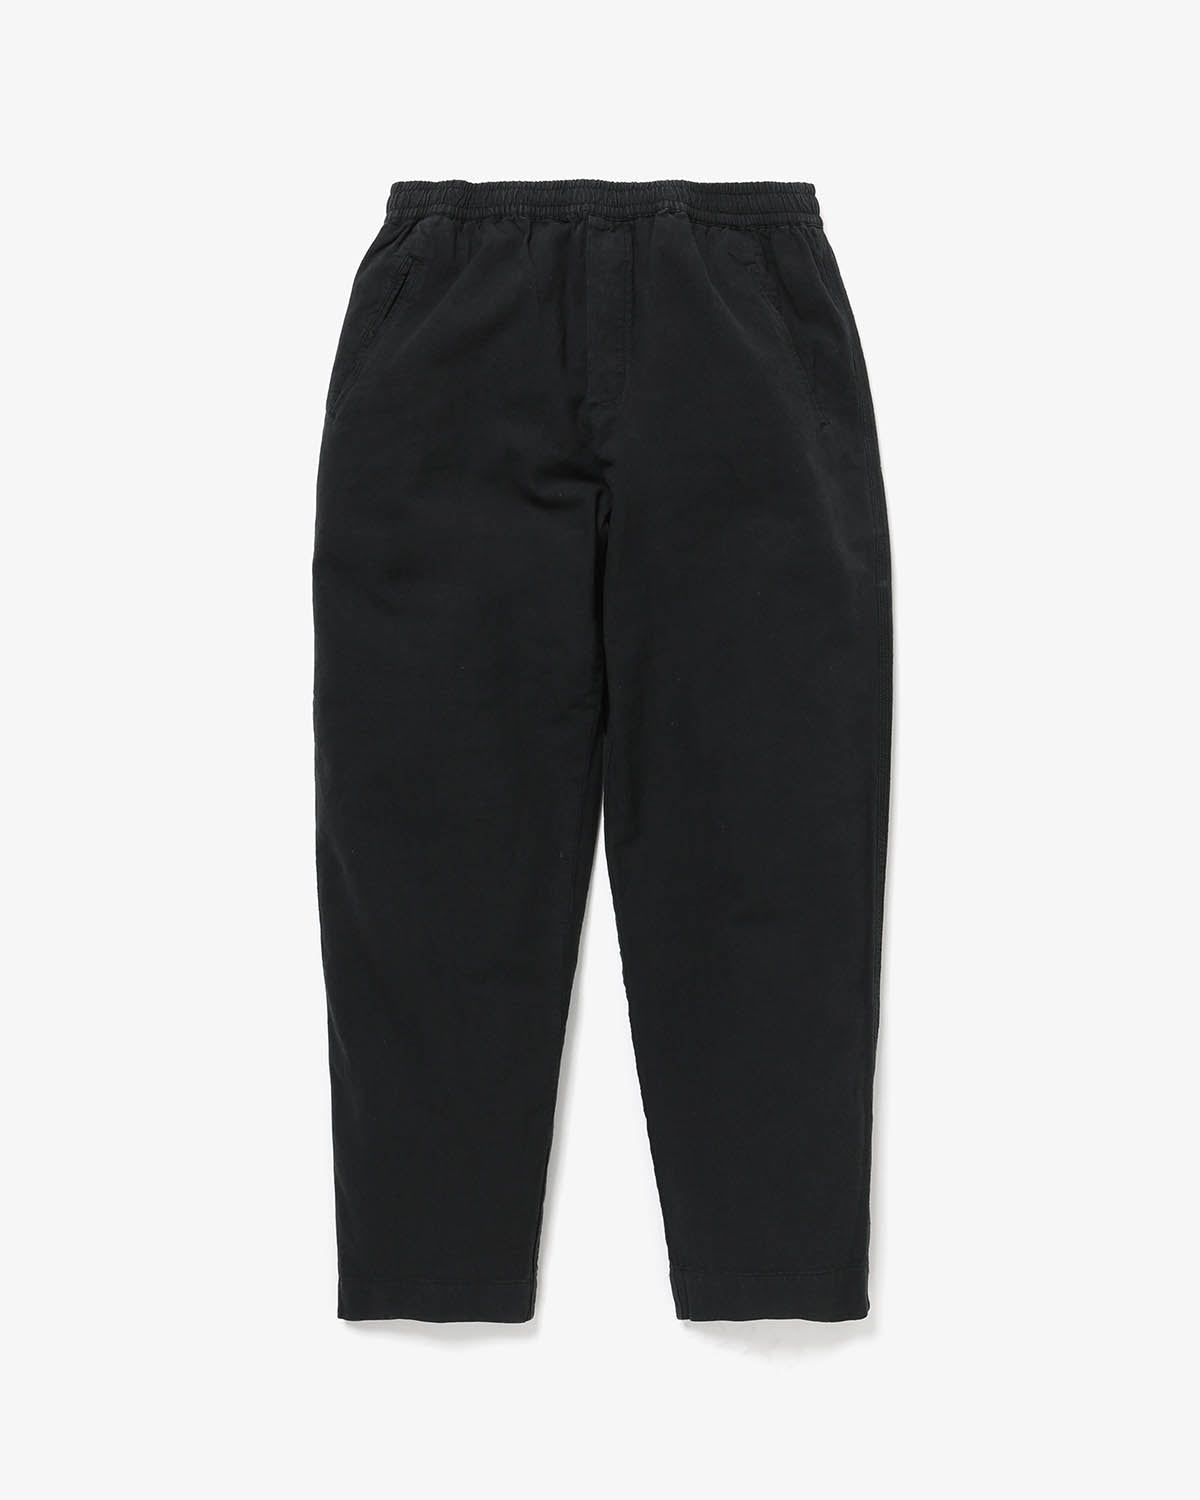 DRAWCORD ASSEMBLY PANT